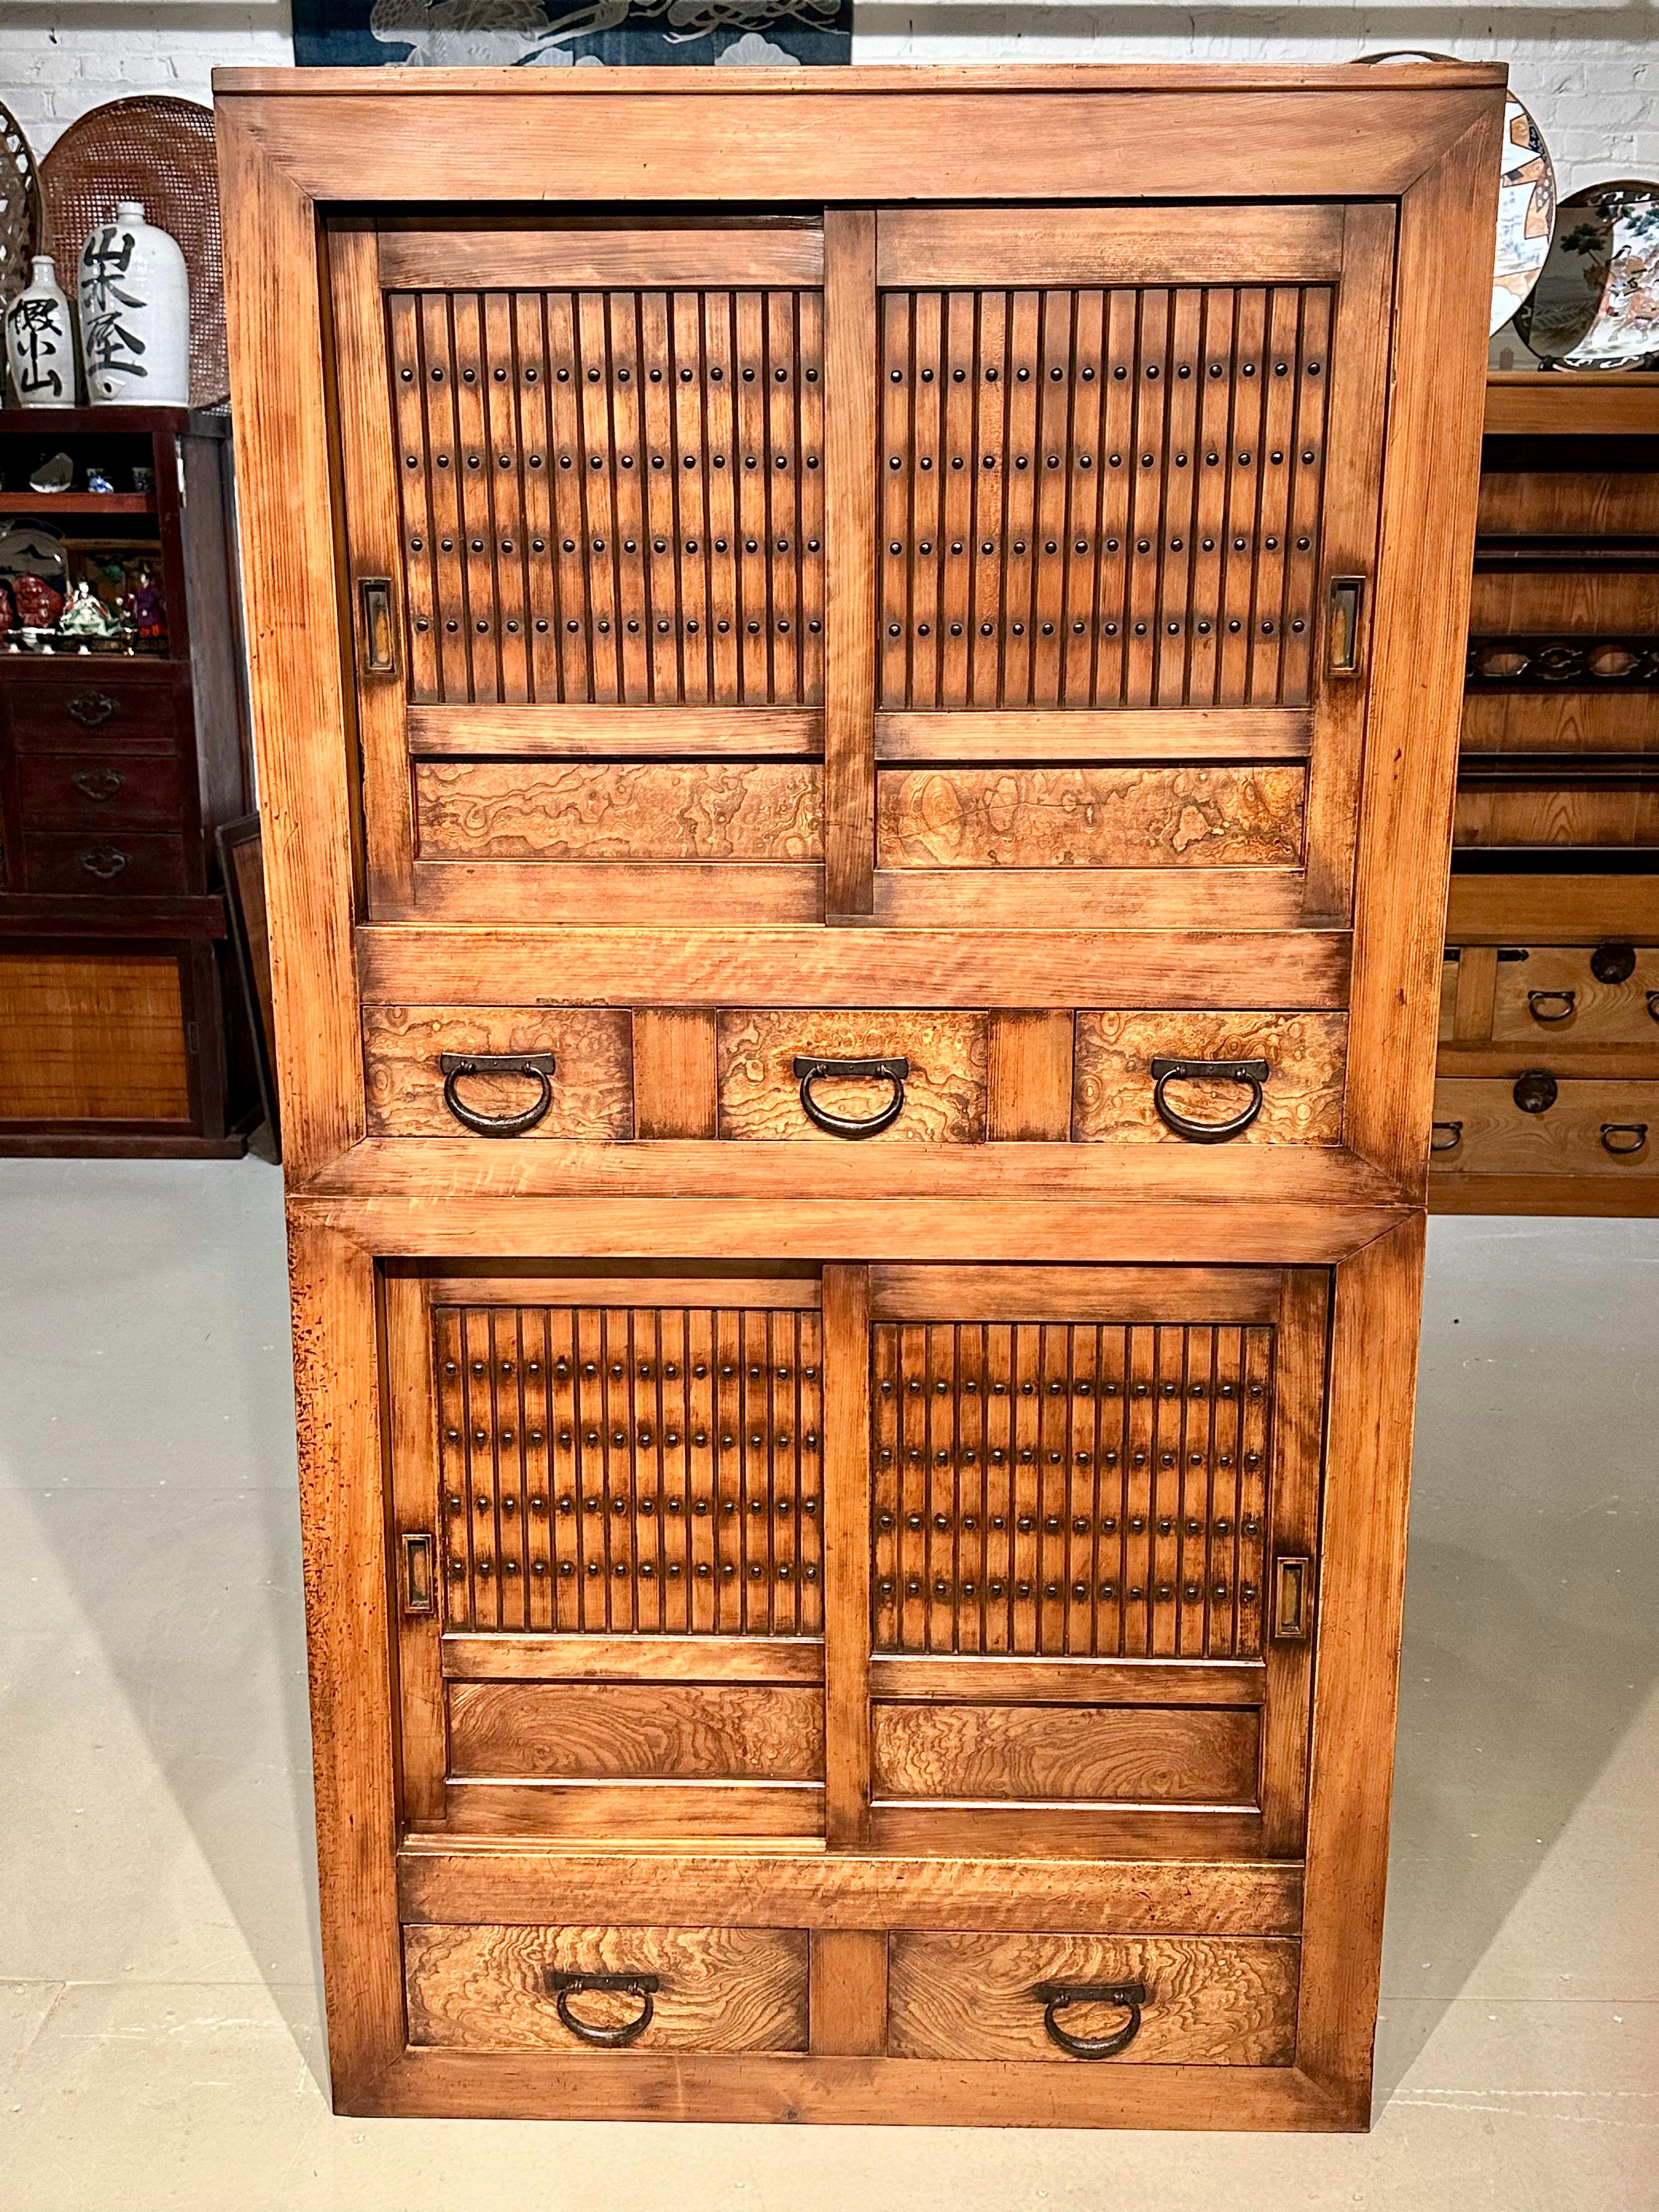 Available from Shogun's Gallery in Portland, Oregon for over 40 years specializing in Asian Arts & Antiques.

This is a beauty with a natural wood finish. This mid Meiji era c1880's Mizuya or kitchen tansu has all the original five drawers and two